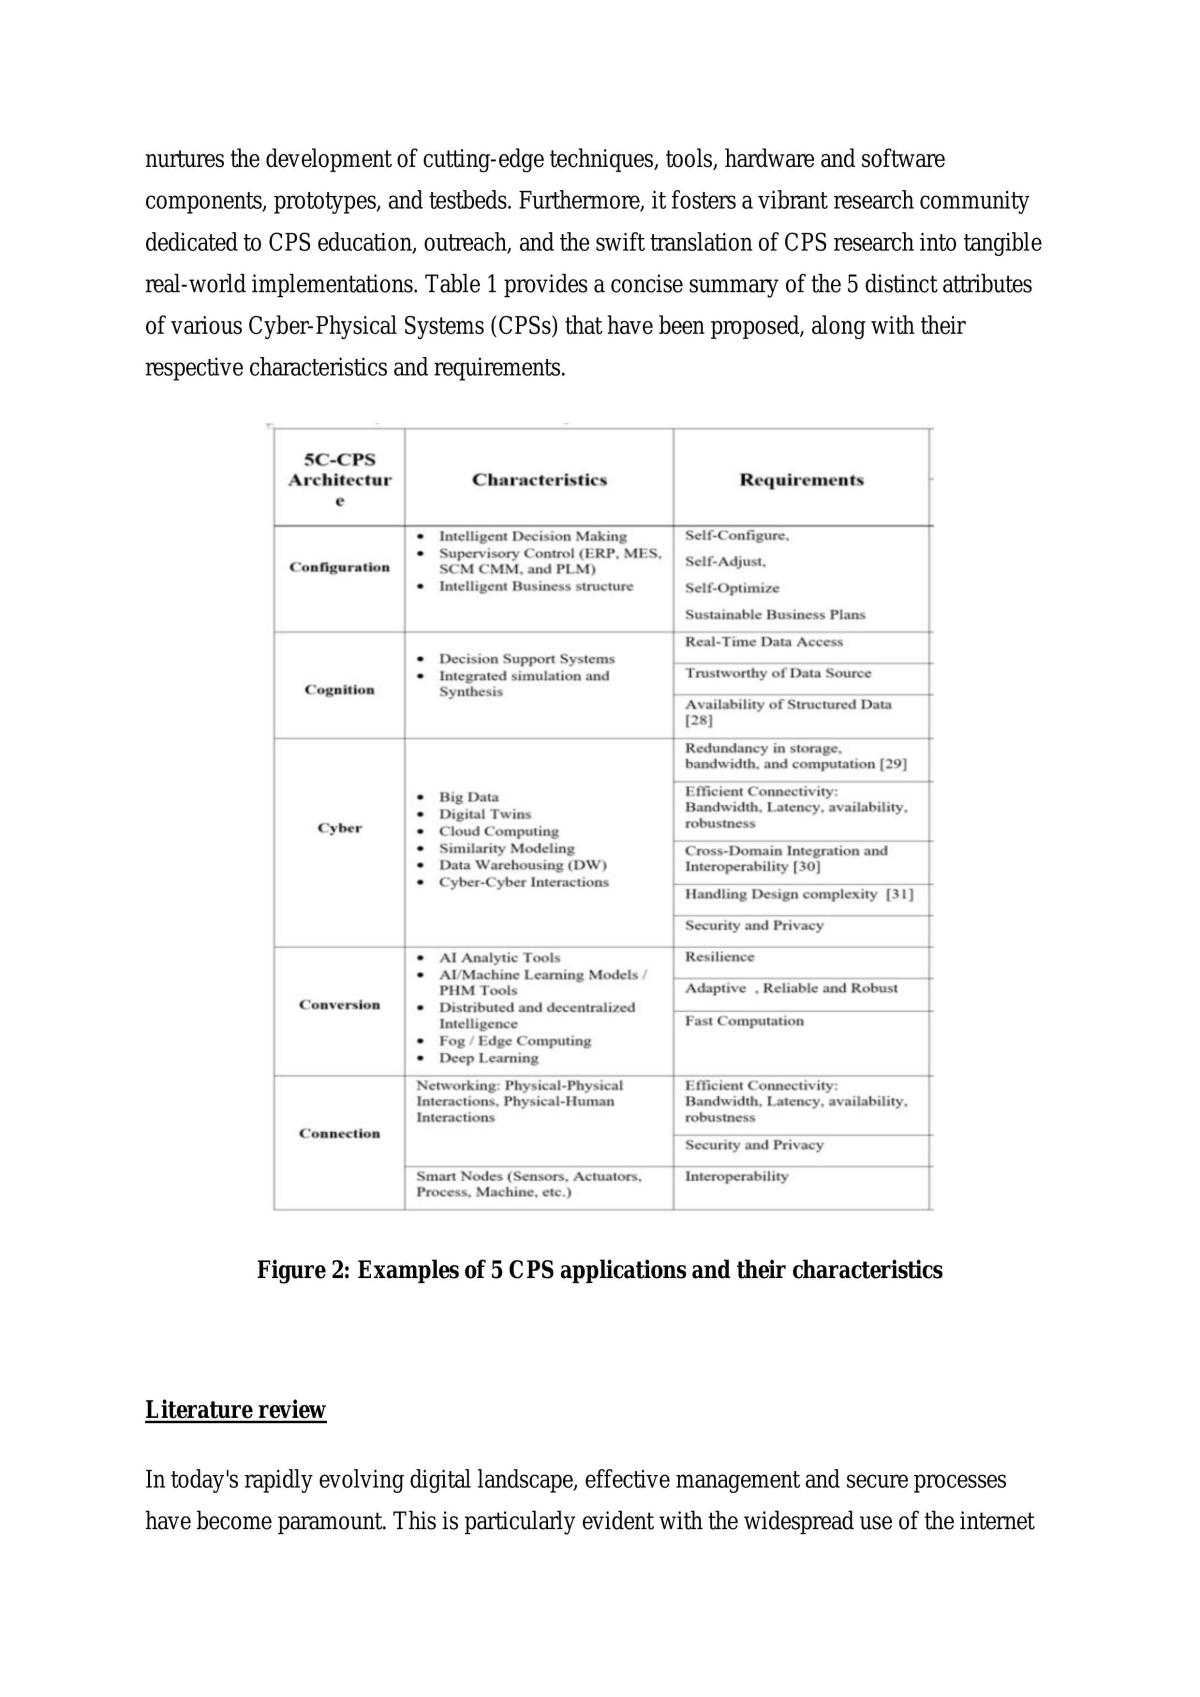 UEMH 4283- Assignment 1 (Case Study) - Page 13